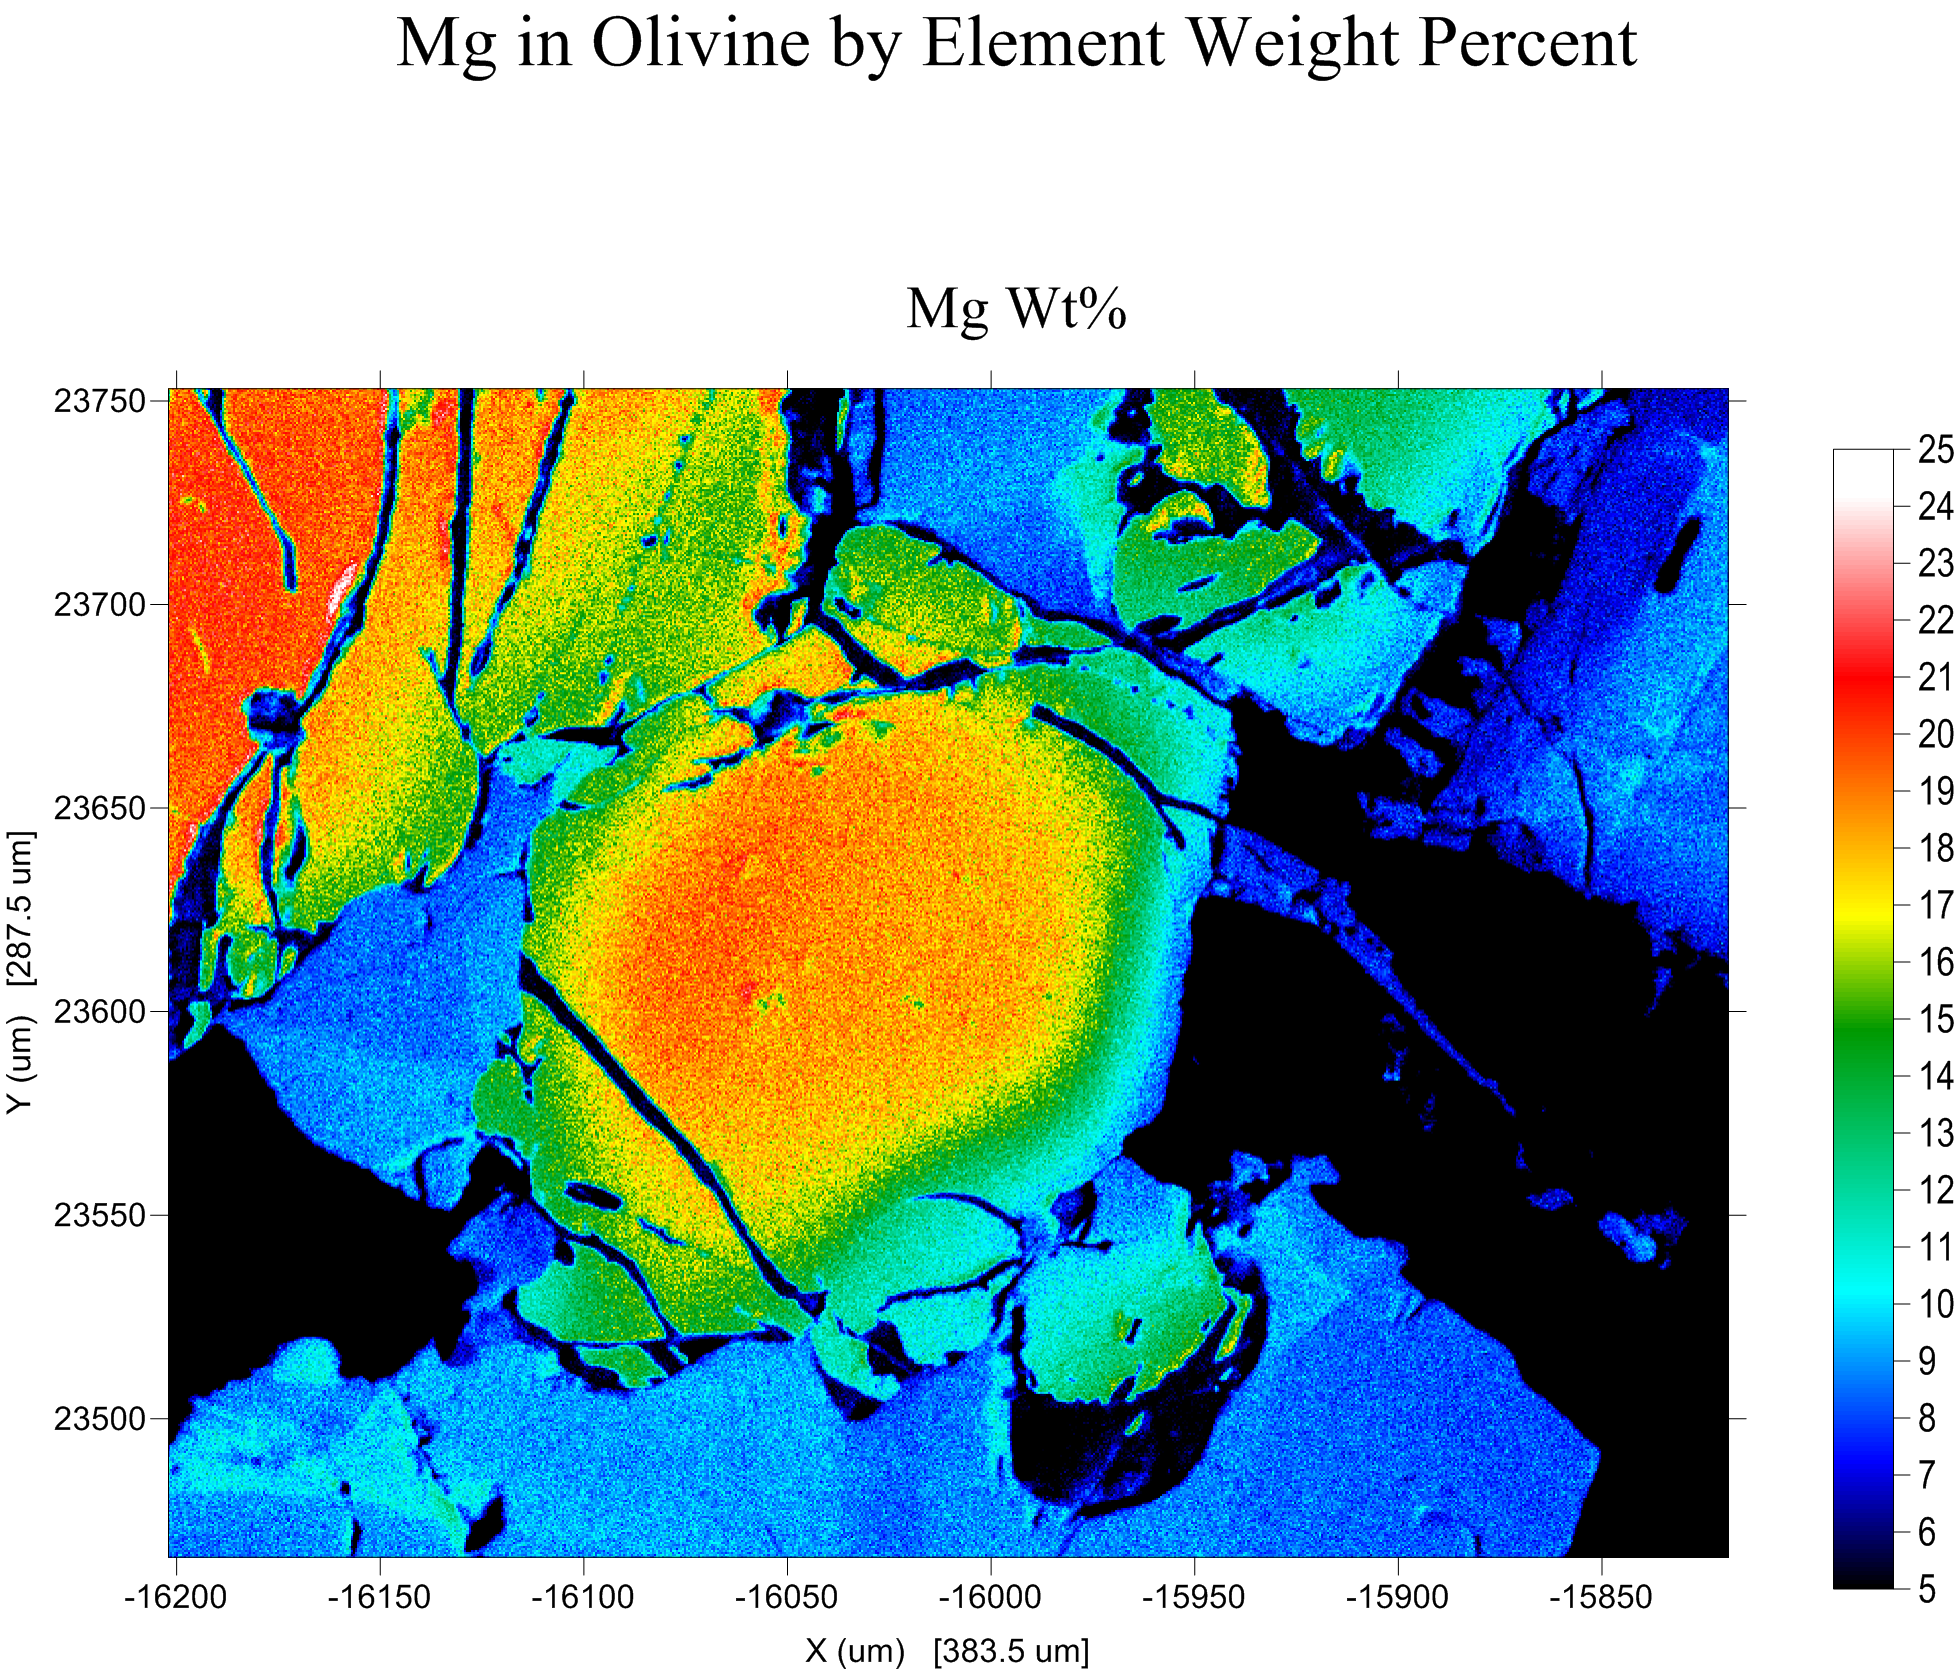 Magnesium in olivine by elemental weight percent